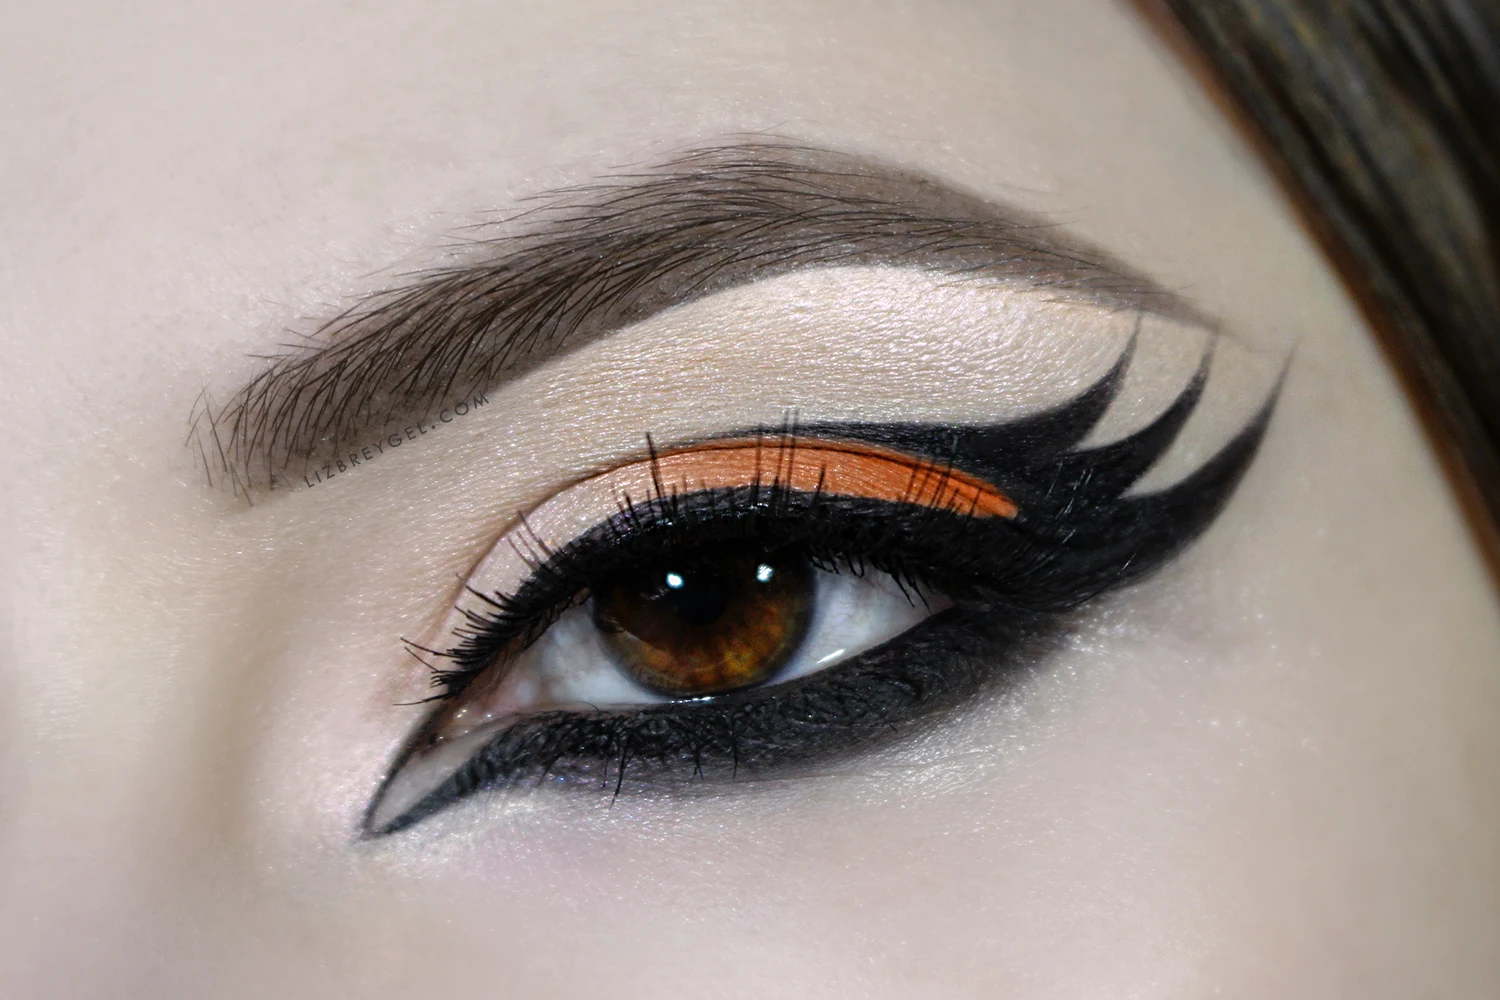 a close-up picture of an eye with a dramatic, Gothic eyeliner makeup.